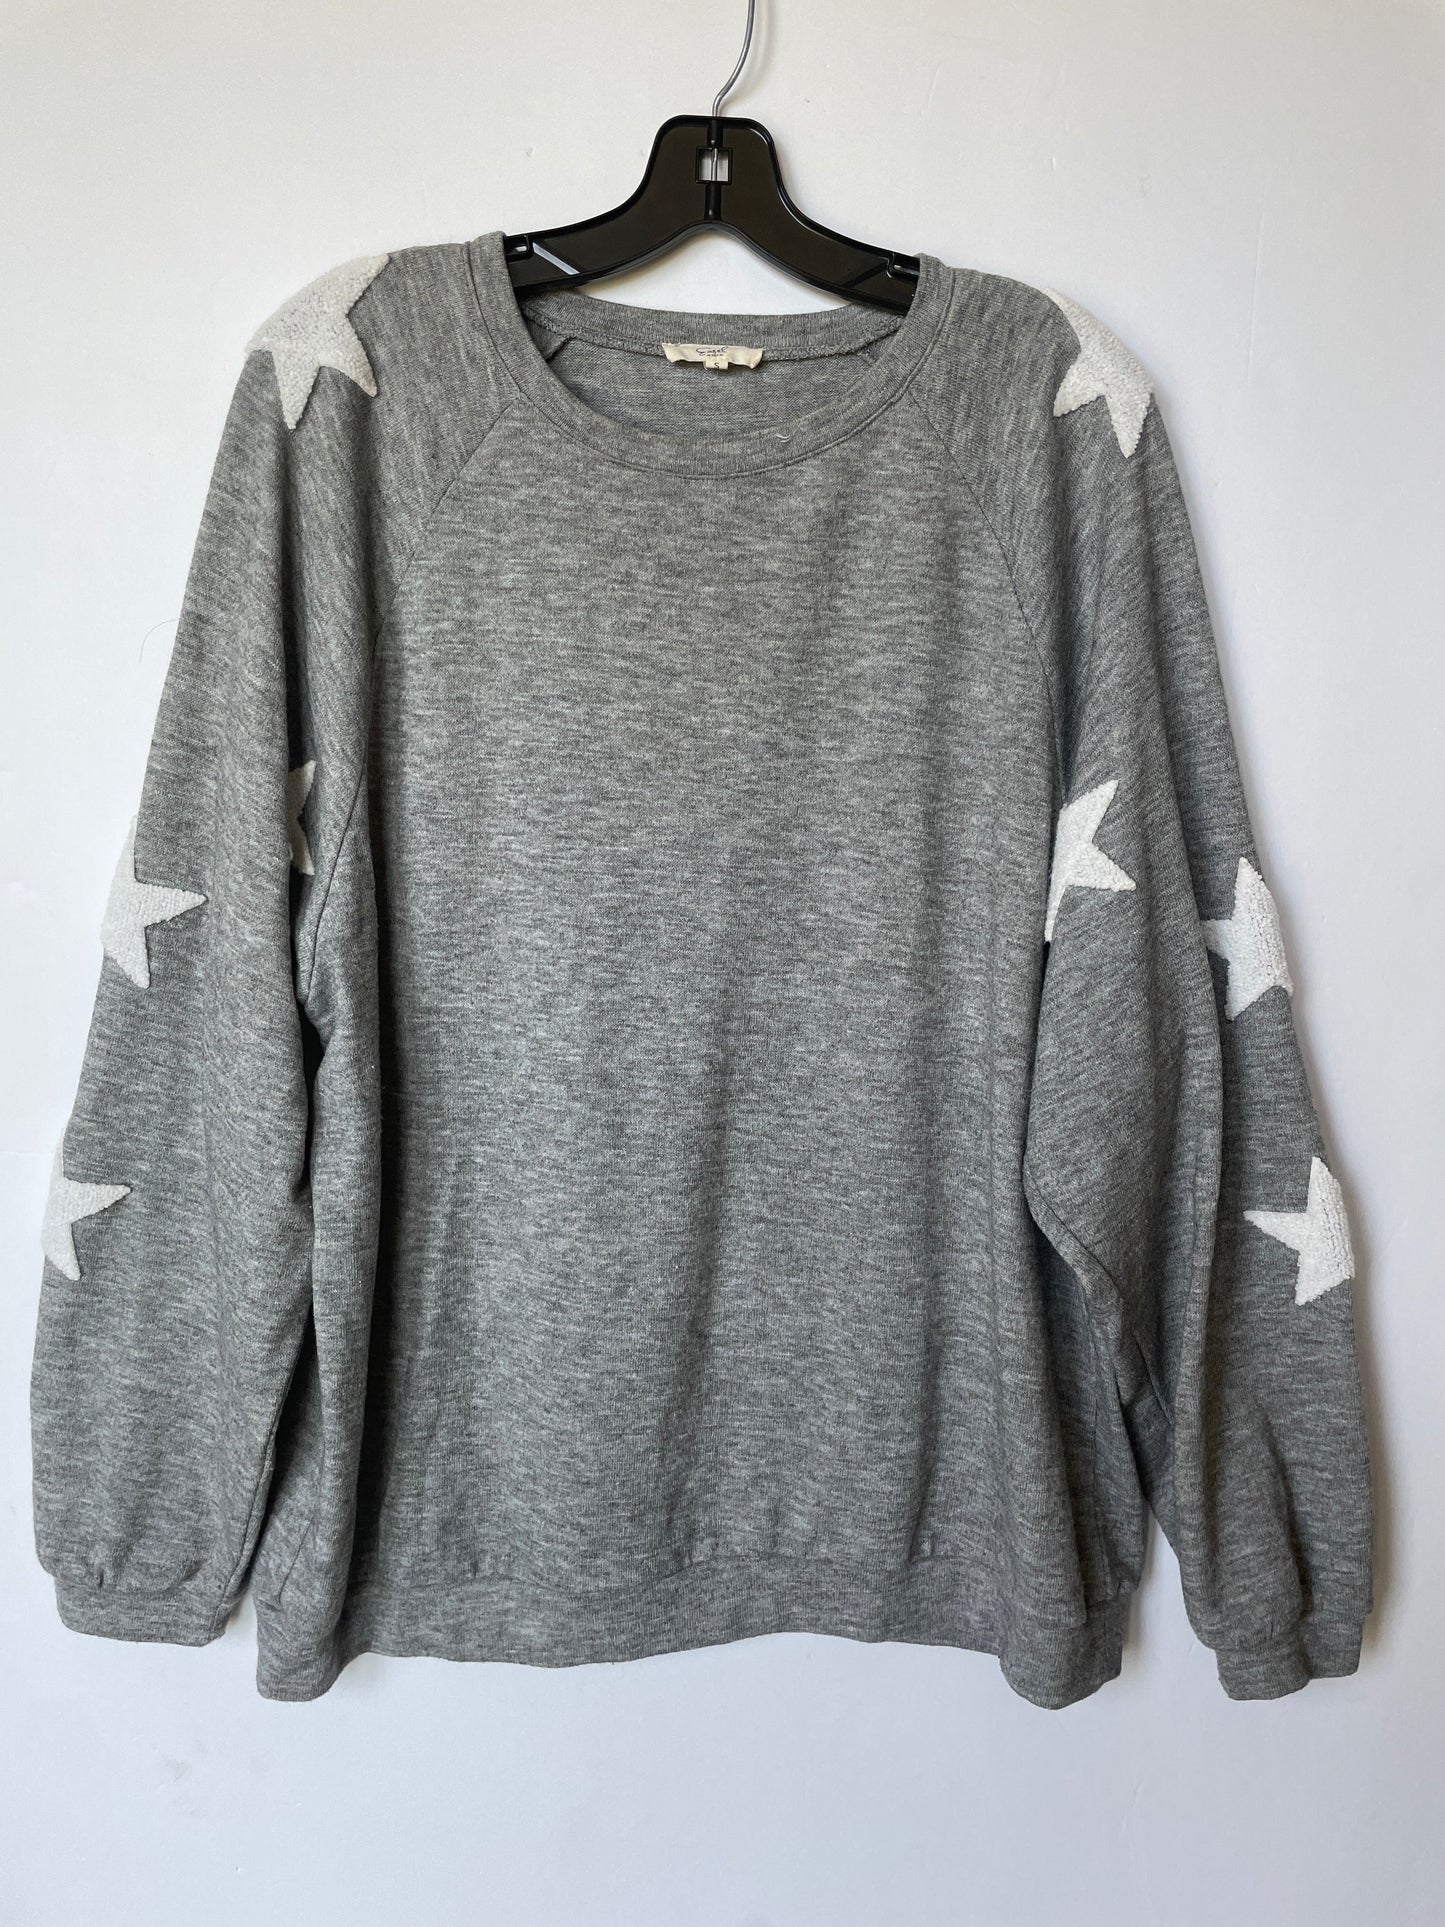 Grey Top Long Sleeve Easel, Size S